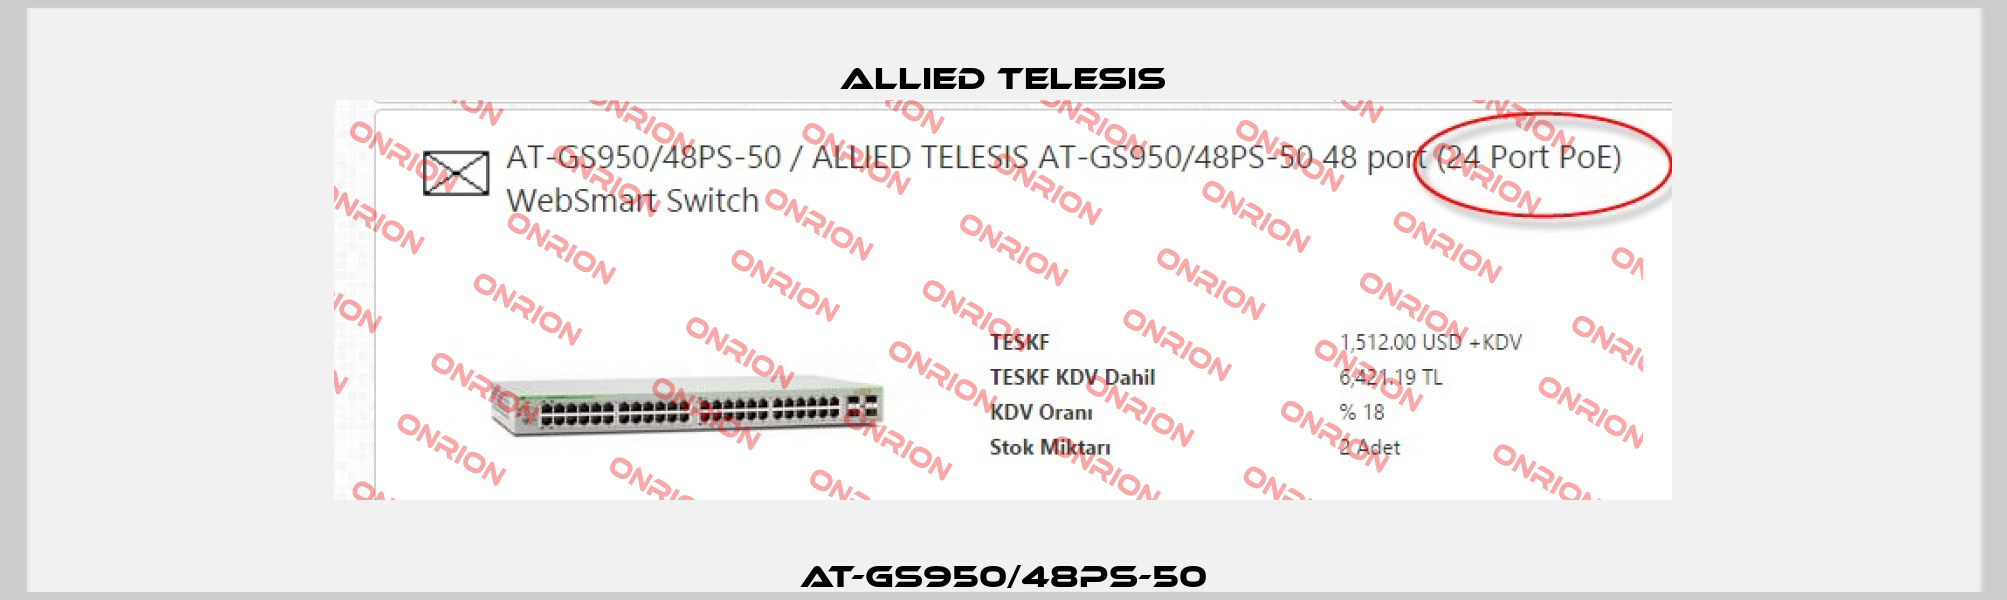 AT-GS950/48PS-50 Allied Telesis